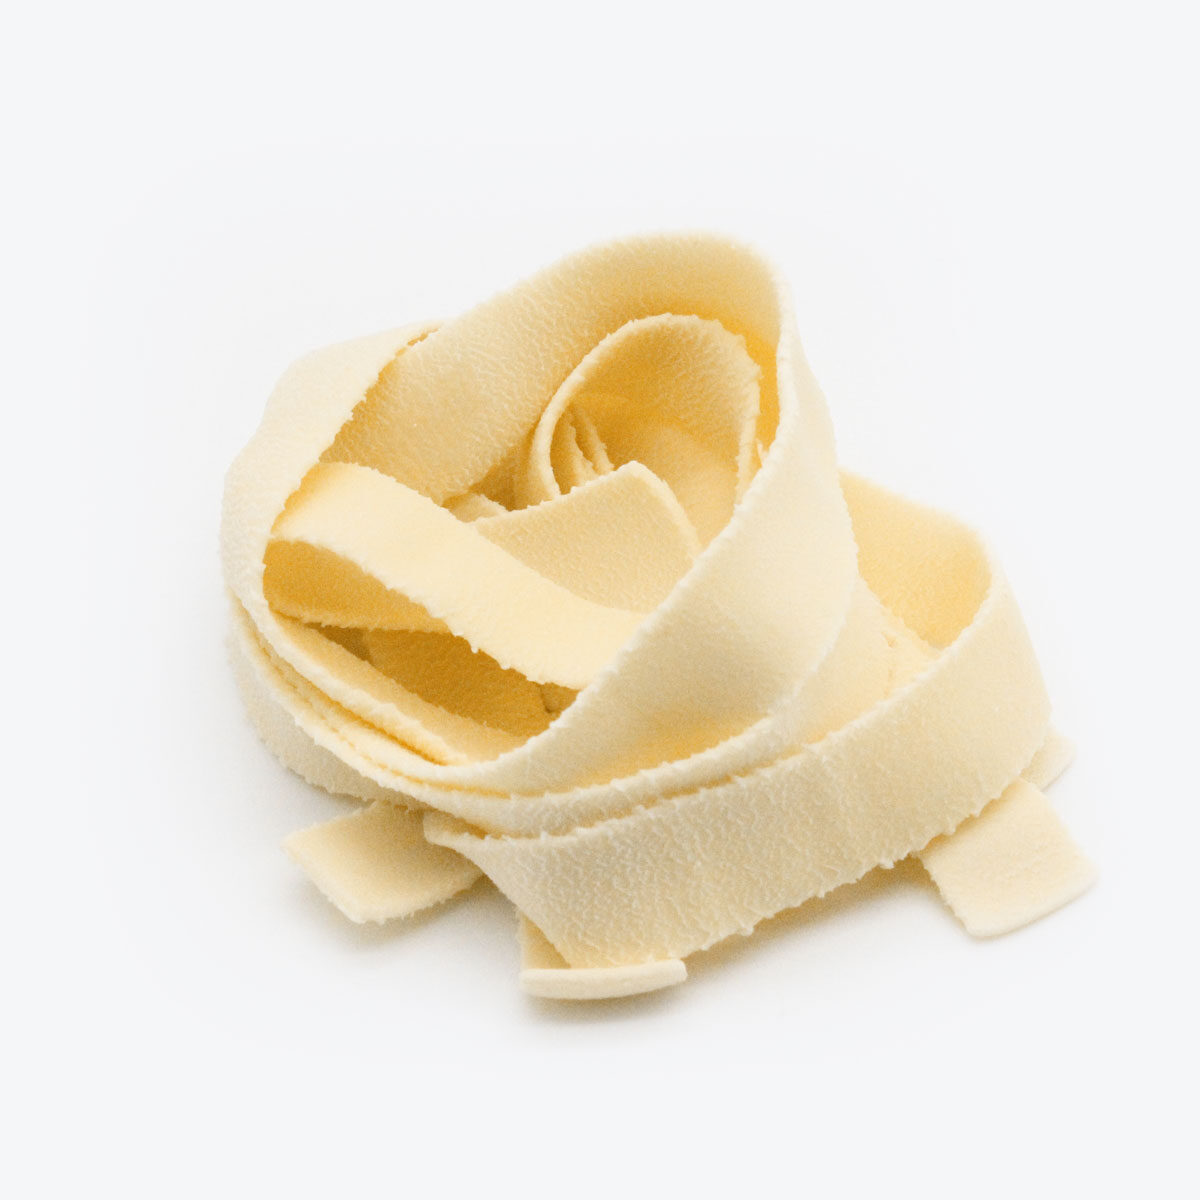 243-Pappardelle_pasta